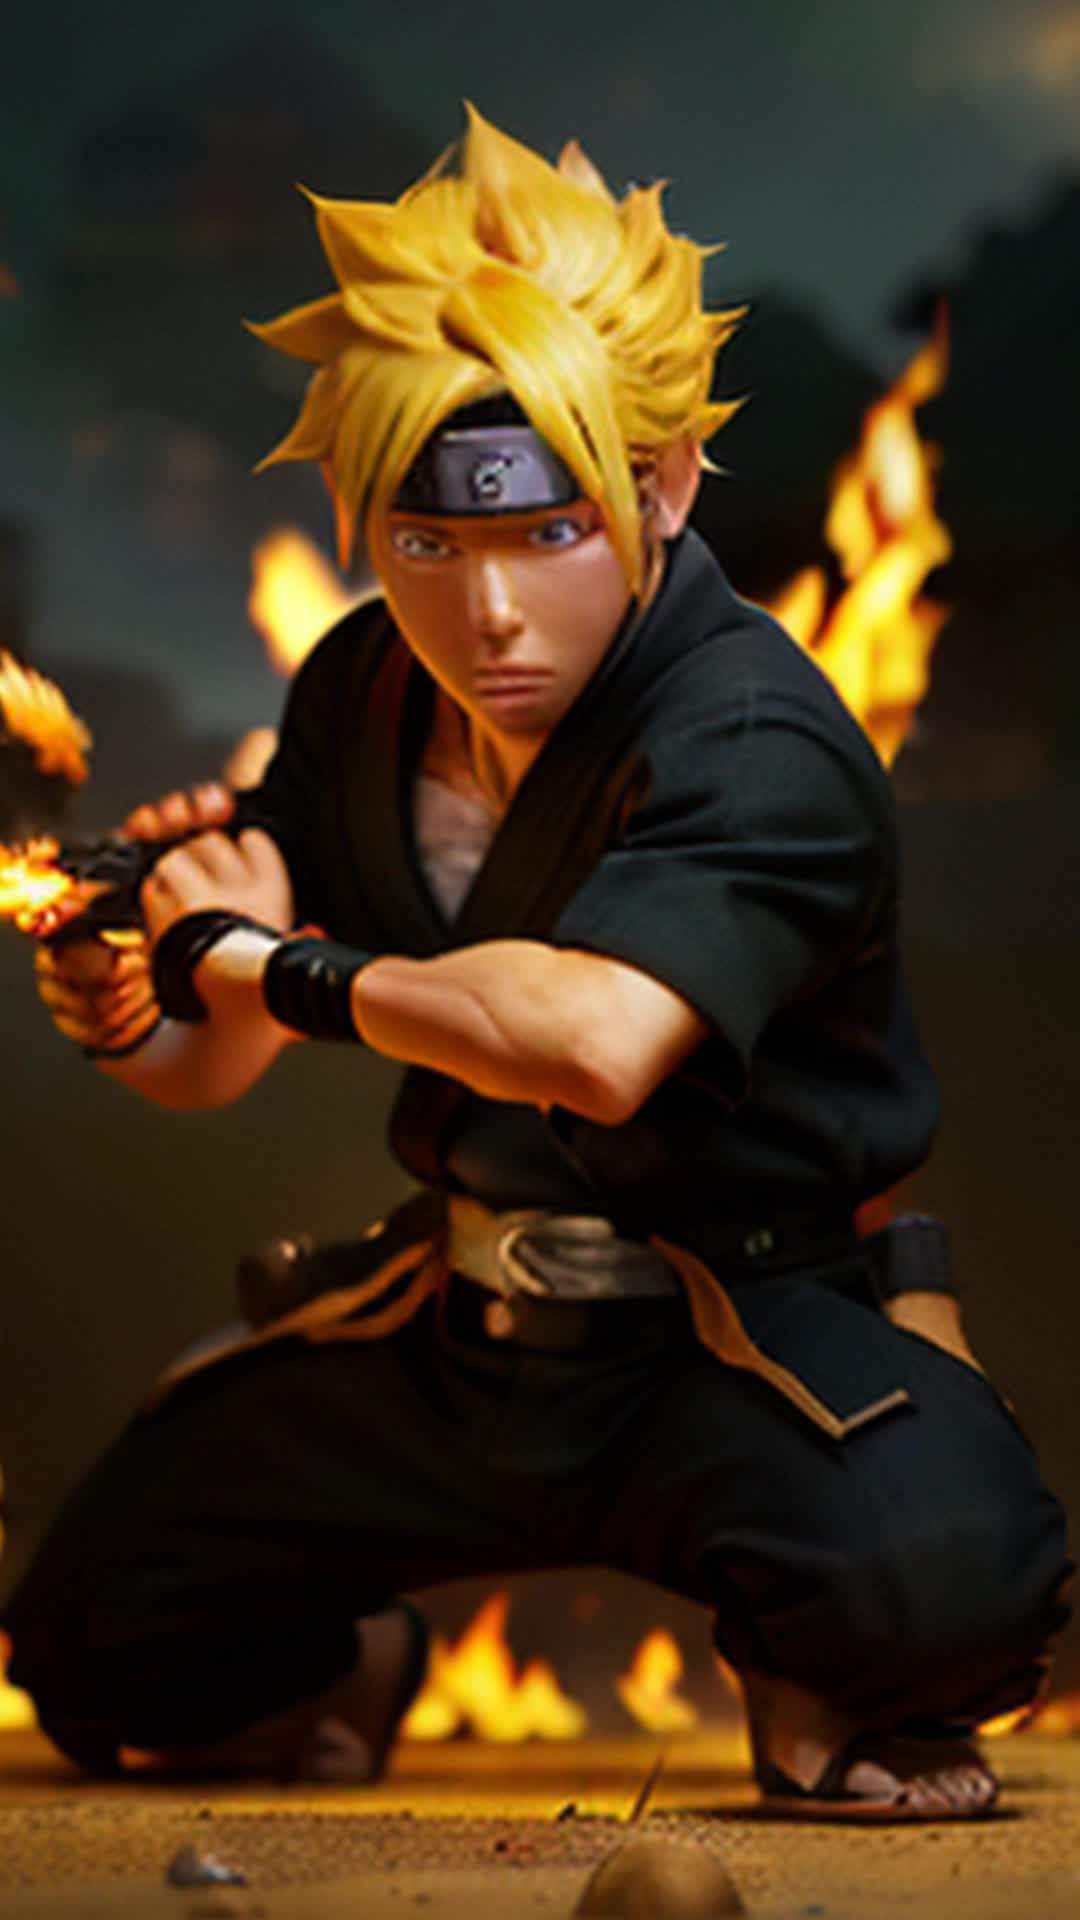 Naruto Uzumaki, fire jutsu, fierce flames, intense energy, dynamic action pose, ninja battlefield, fiery sparks flying, detailed and sharp focus, dramatic lighting, soft shadows, cinematic, wideangle, rendered by octane